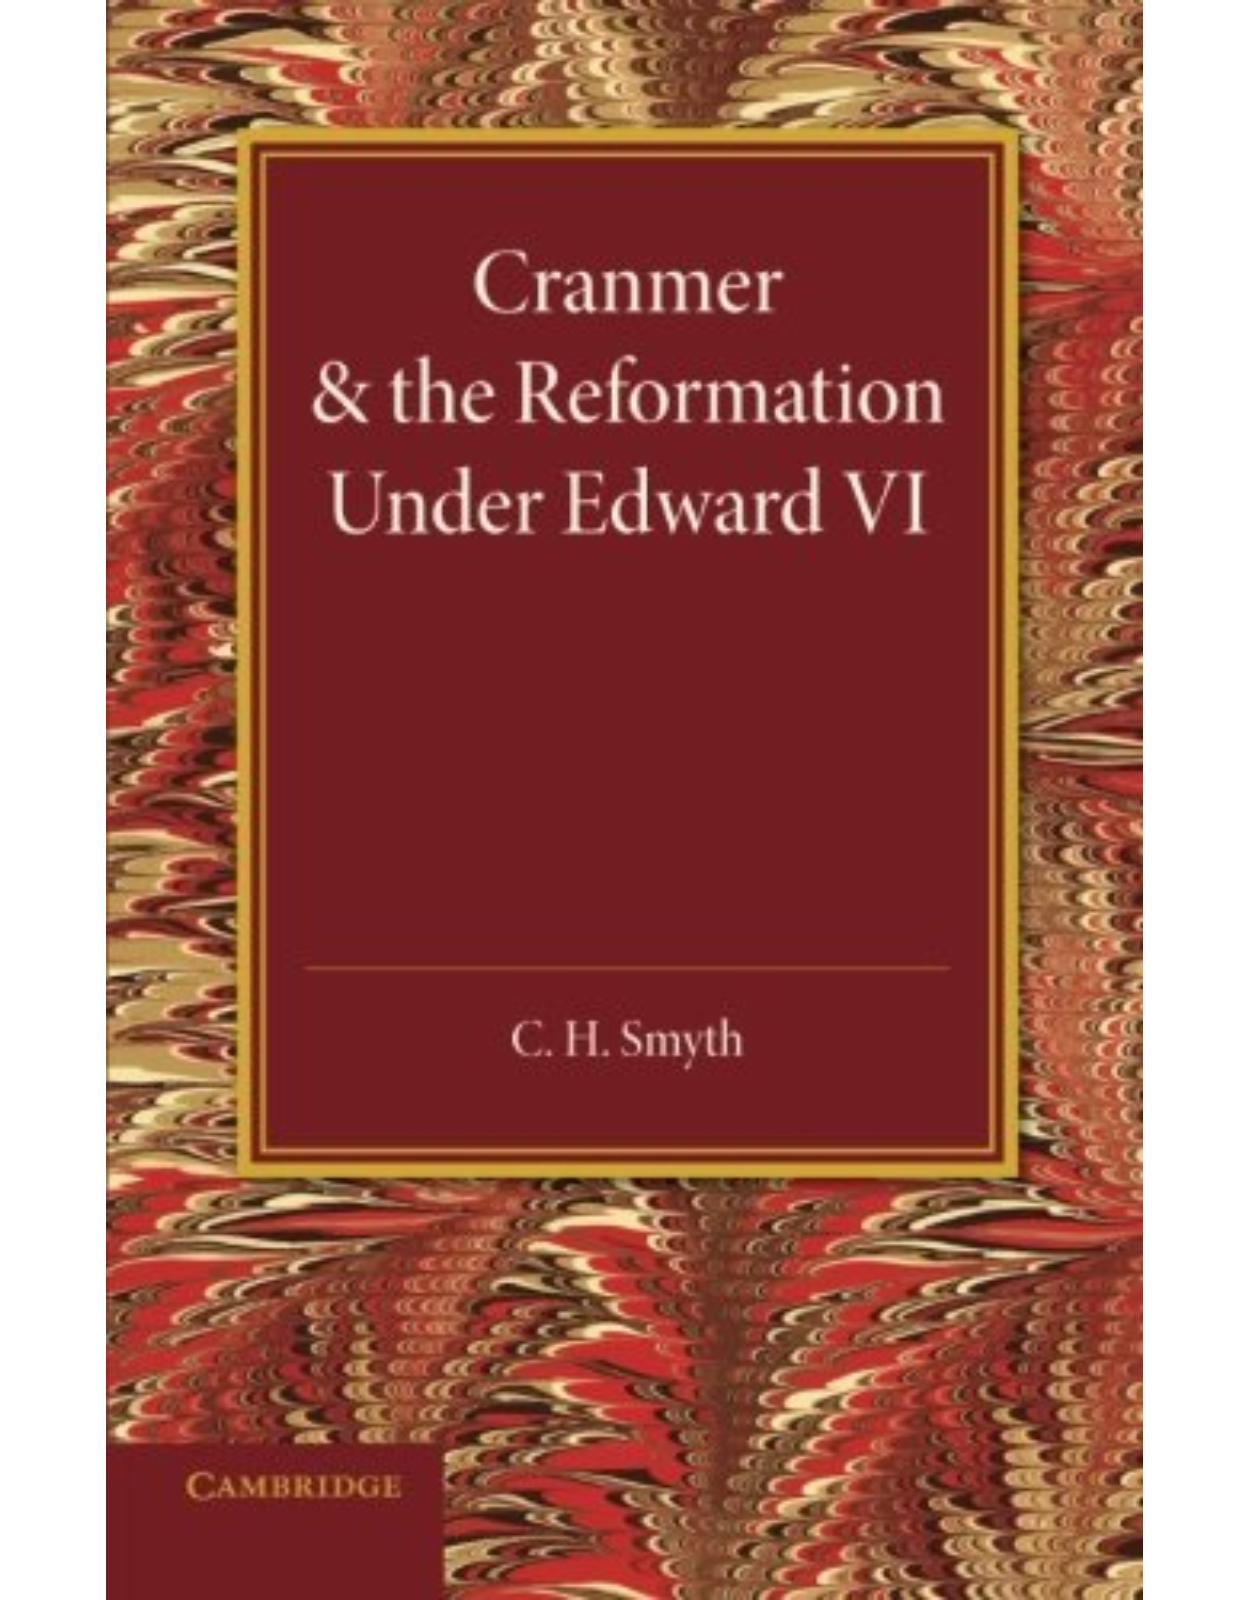 Cranmer and the Reformation under Edward VI